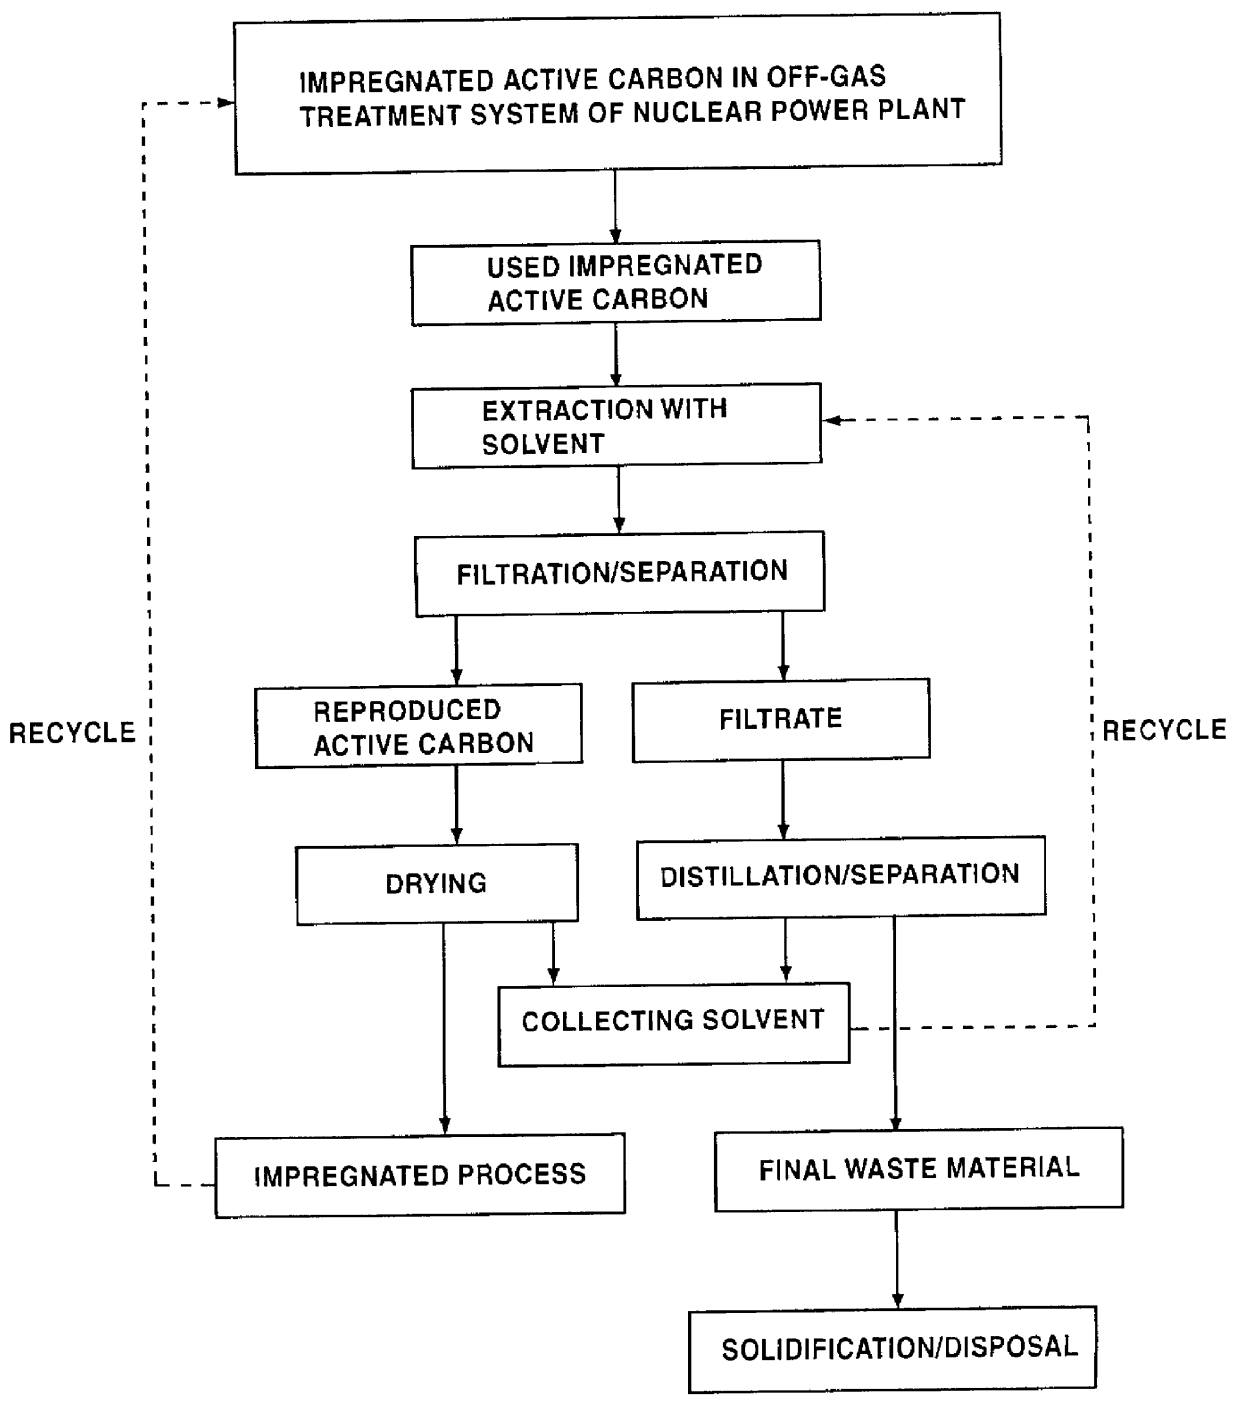 Wet recycling process for impregnated active carbon by extraction with organic solvent